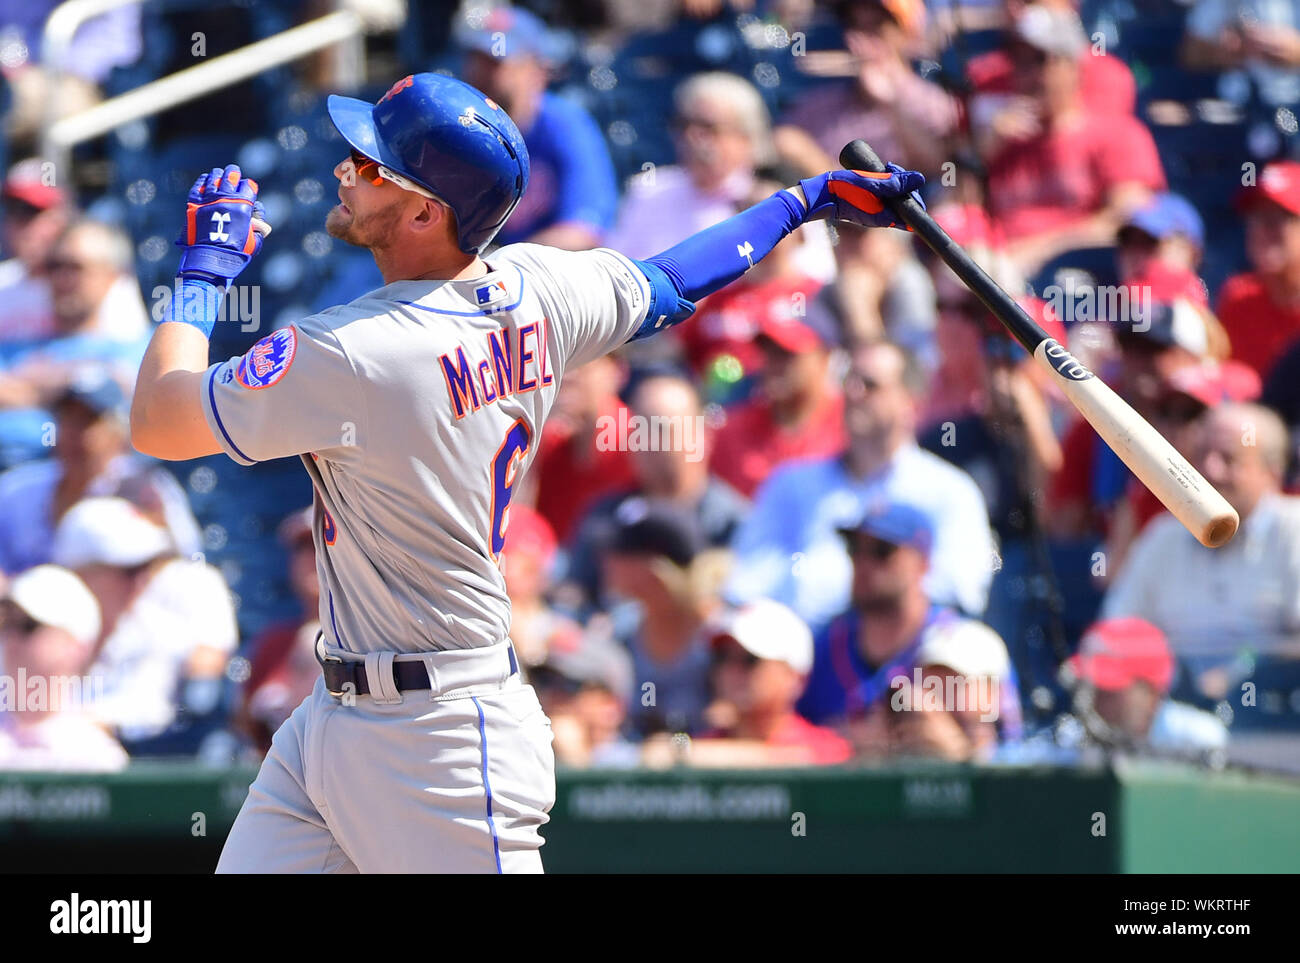 Washington, United States. 04th Sep, 2019. New York Mets Jeff McNeil hits an RBI single sending home Amed Rosario and Brandon Nimmo against the Washington Nationals in the sixth inning at National Park in Washington, DC on Wednesday, September 4, 2019. Photo by Kevin Dietsch/UPI Credit: UPI/Alamy Live News Stock Photo